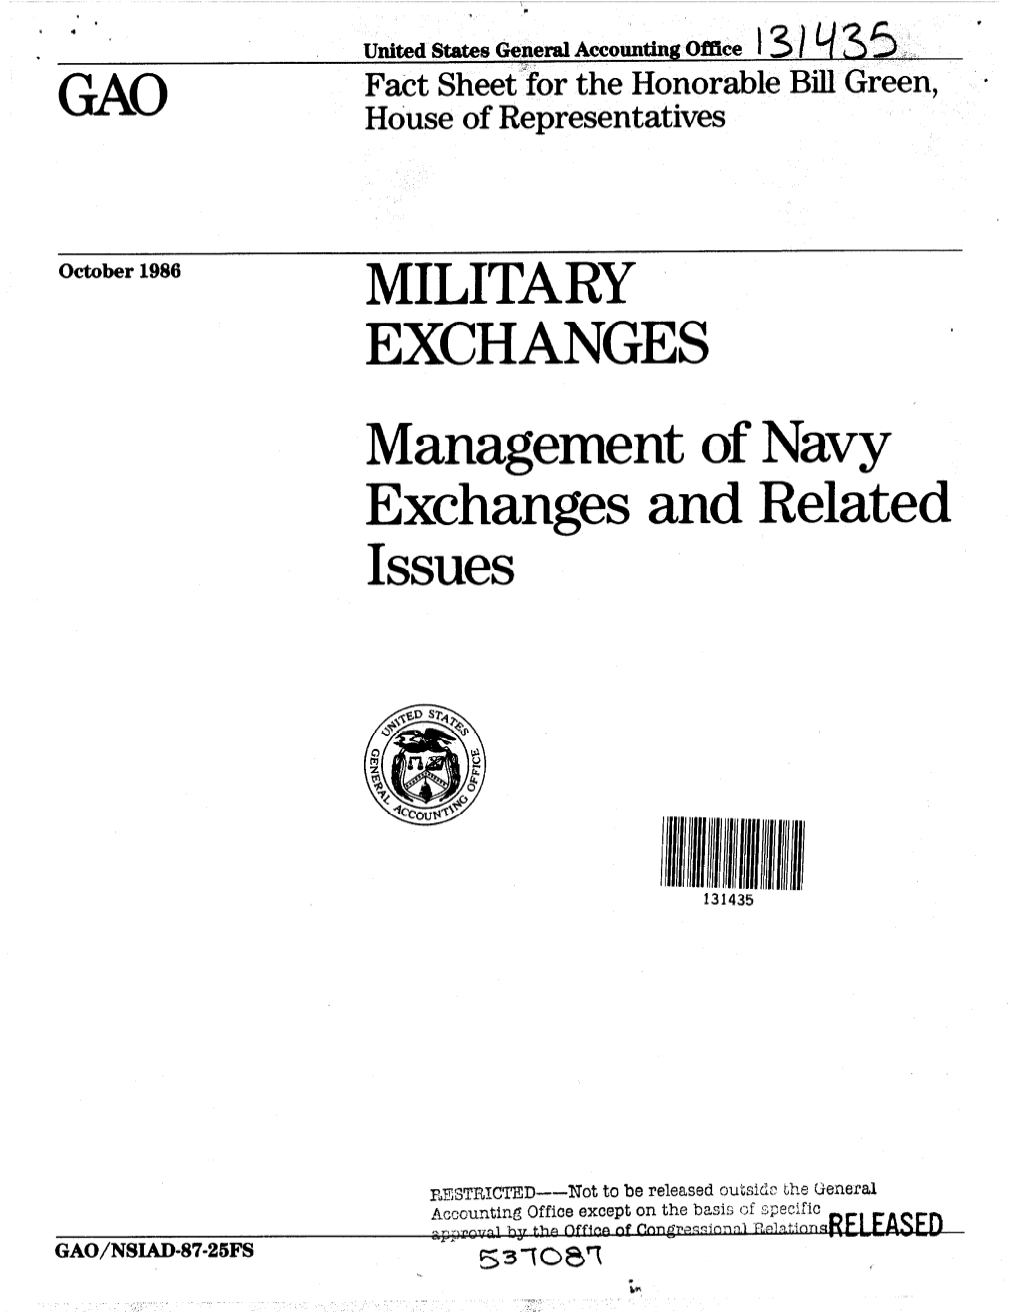 Management of Navy Exchanges and Related Issues